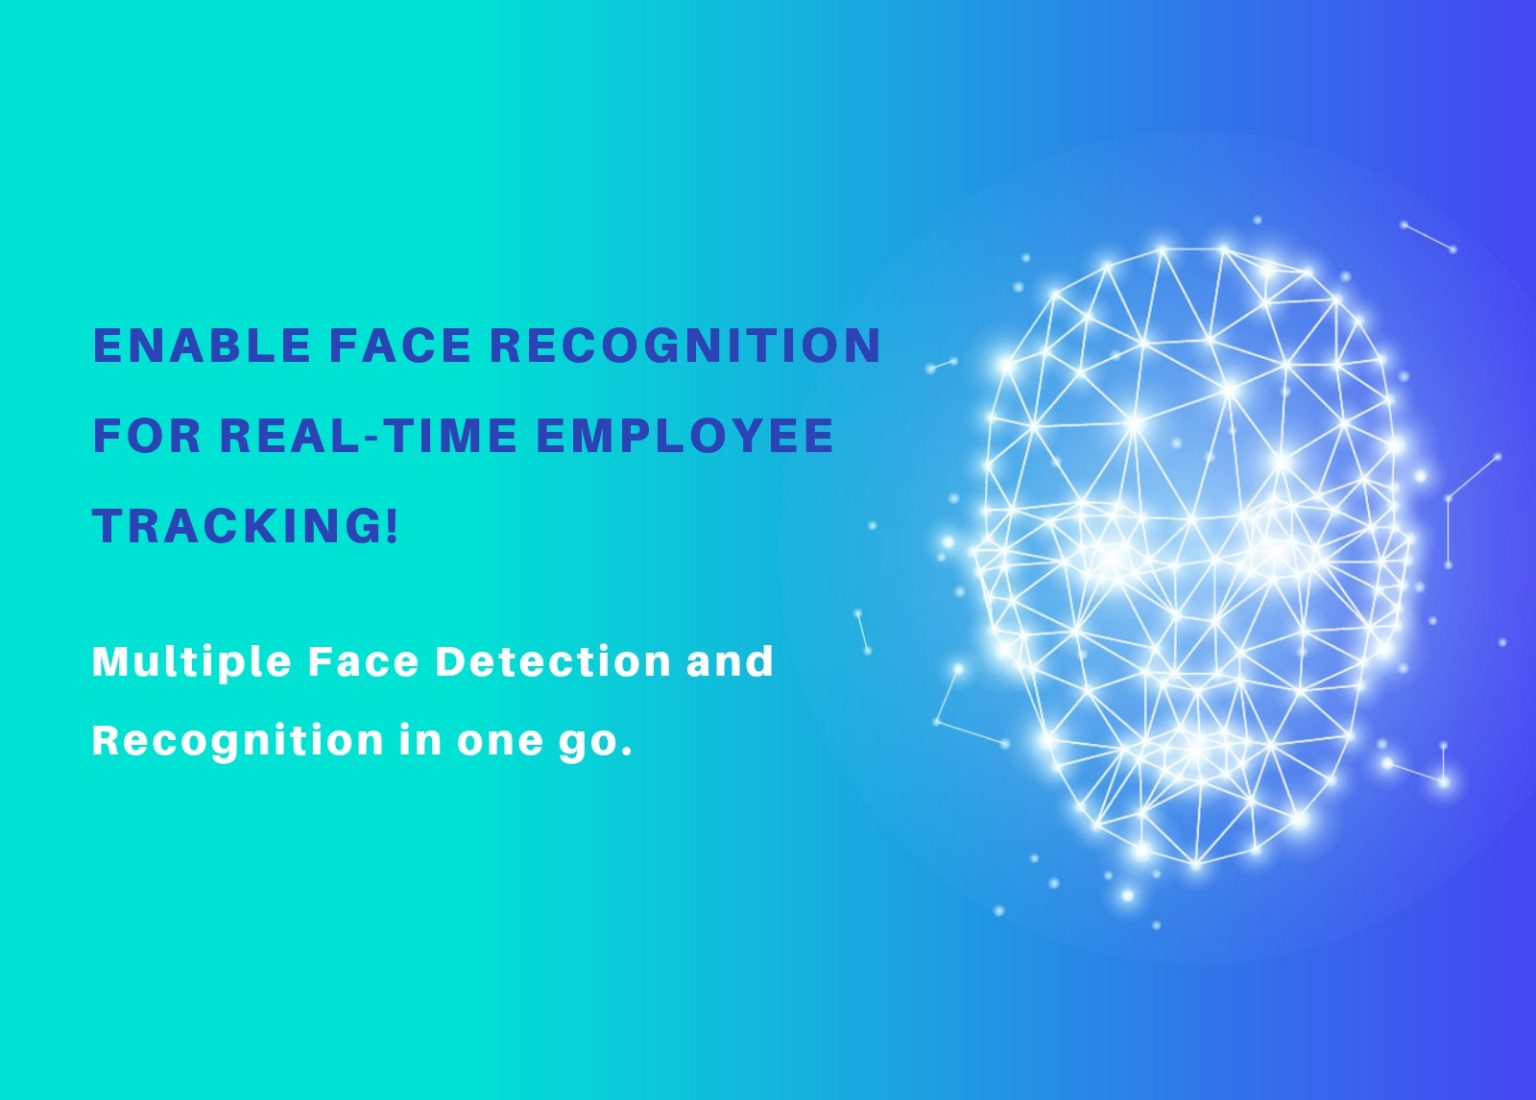 Get The Smartest Way To Mark Employees’ Attendance with Zing Face Recognition Technology